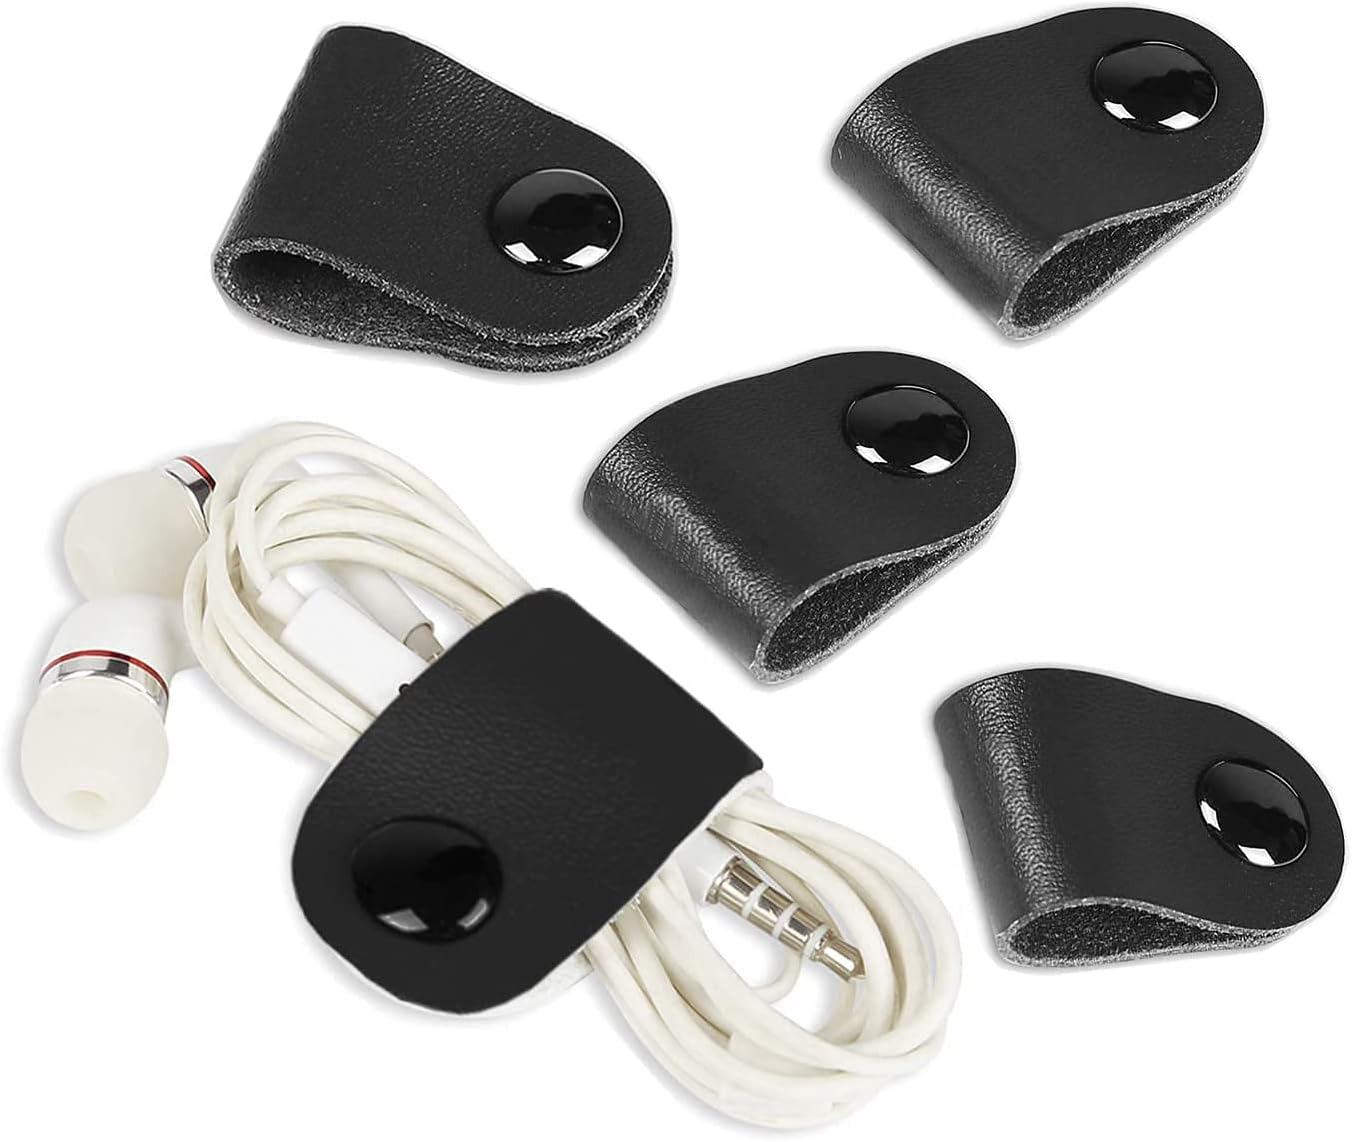 Genuine Leather Cord Organizer,Cord Keeper,Cable Organizer USB Holder,Cable Mana